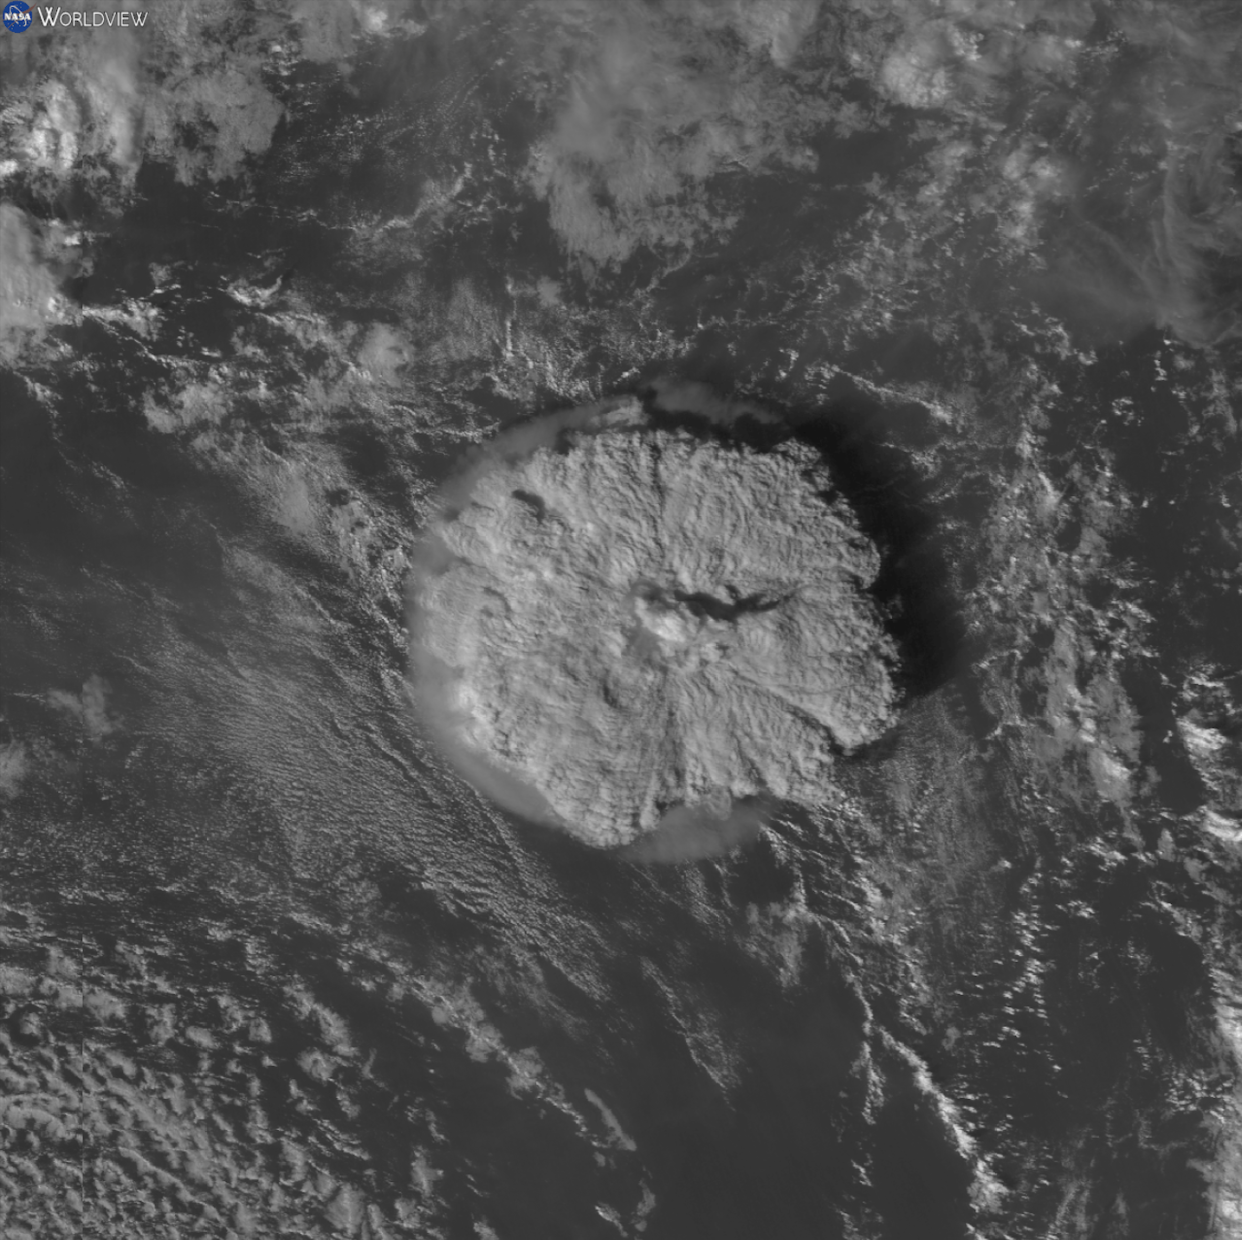 Animation of the 2022 Hunga Tonga eruption recorded on 15 January 2022 by Japan's Himawari-8 weather satellite. This image spans approximately 1,000 kilometres (620 mi) on each side, and the eruption plume is just under 500 kilometres (310 mi) across.